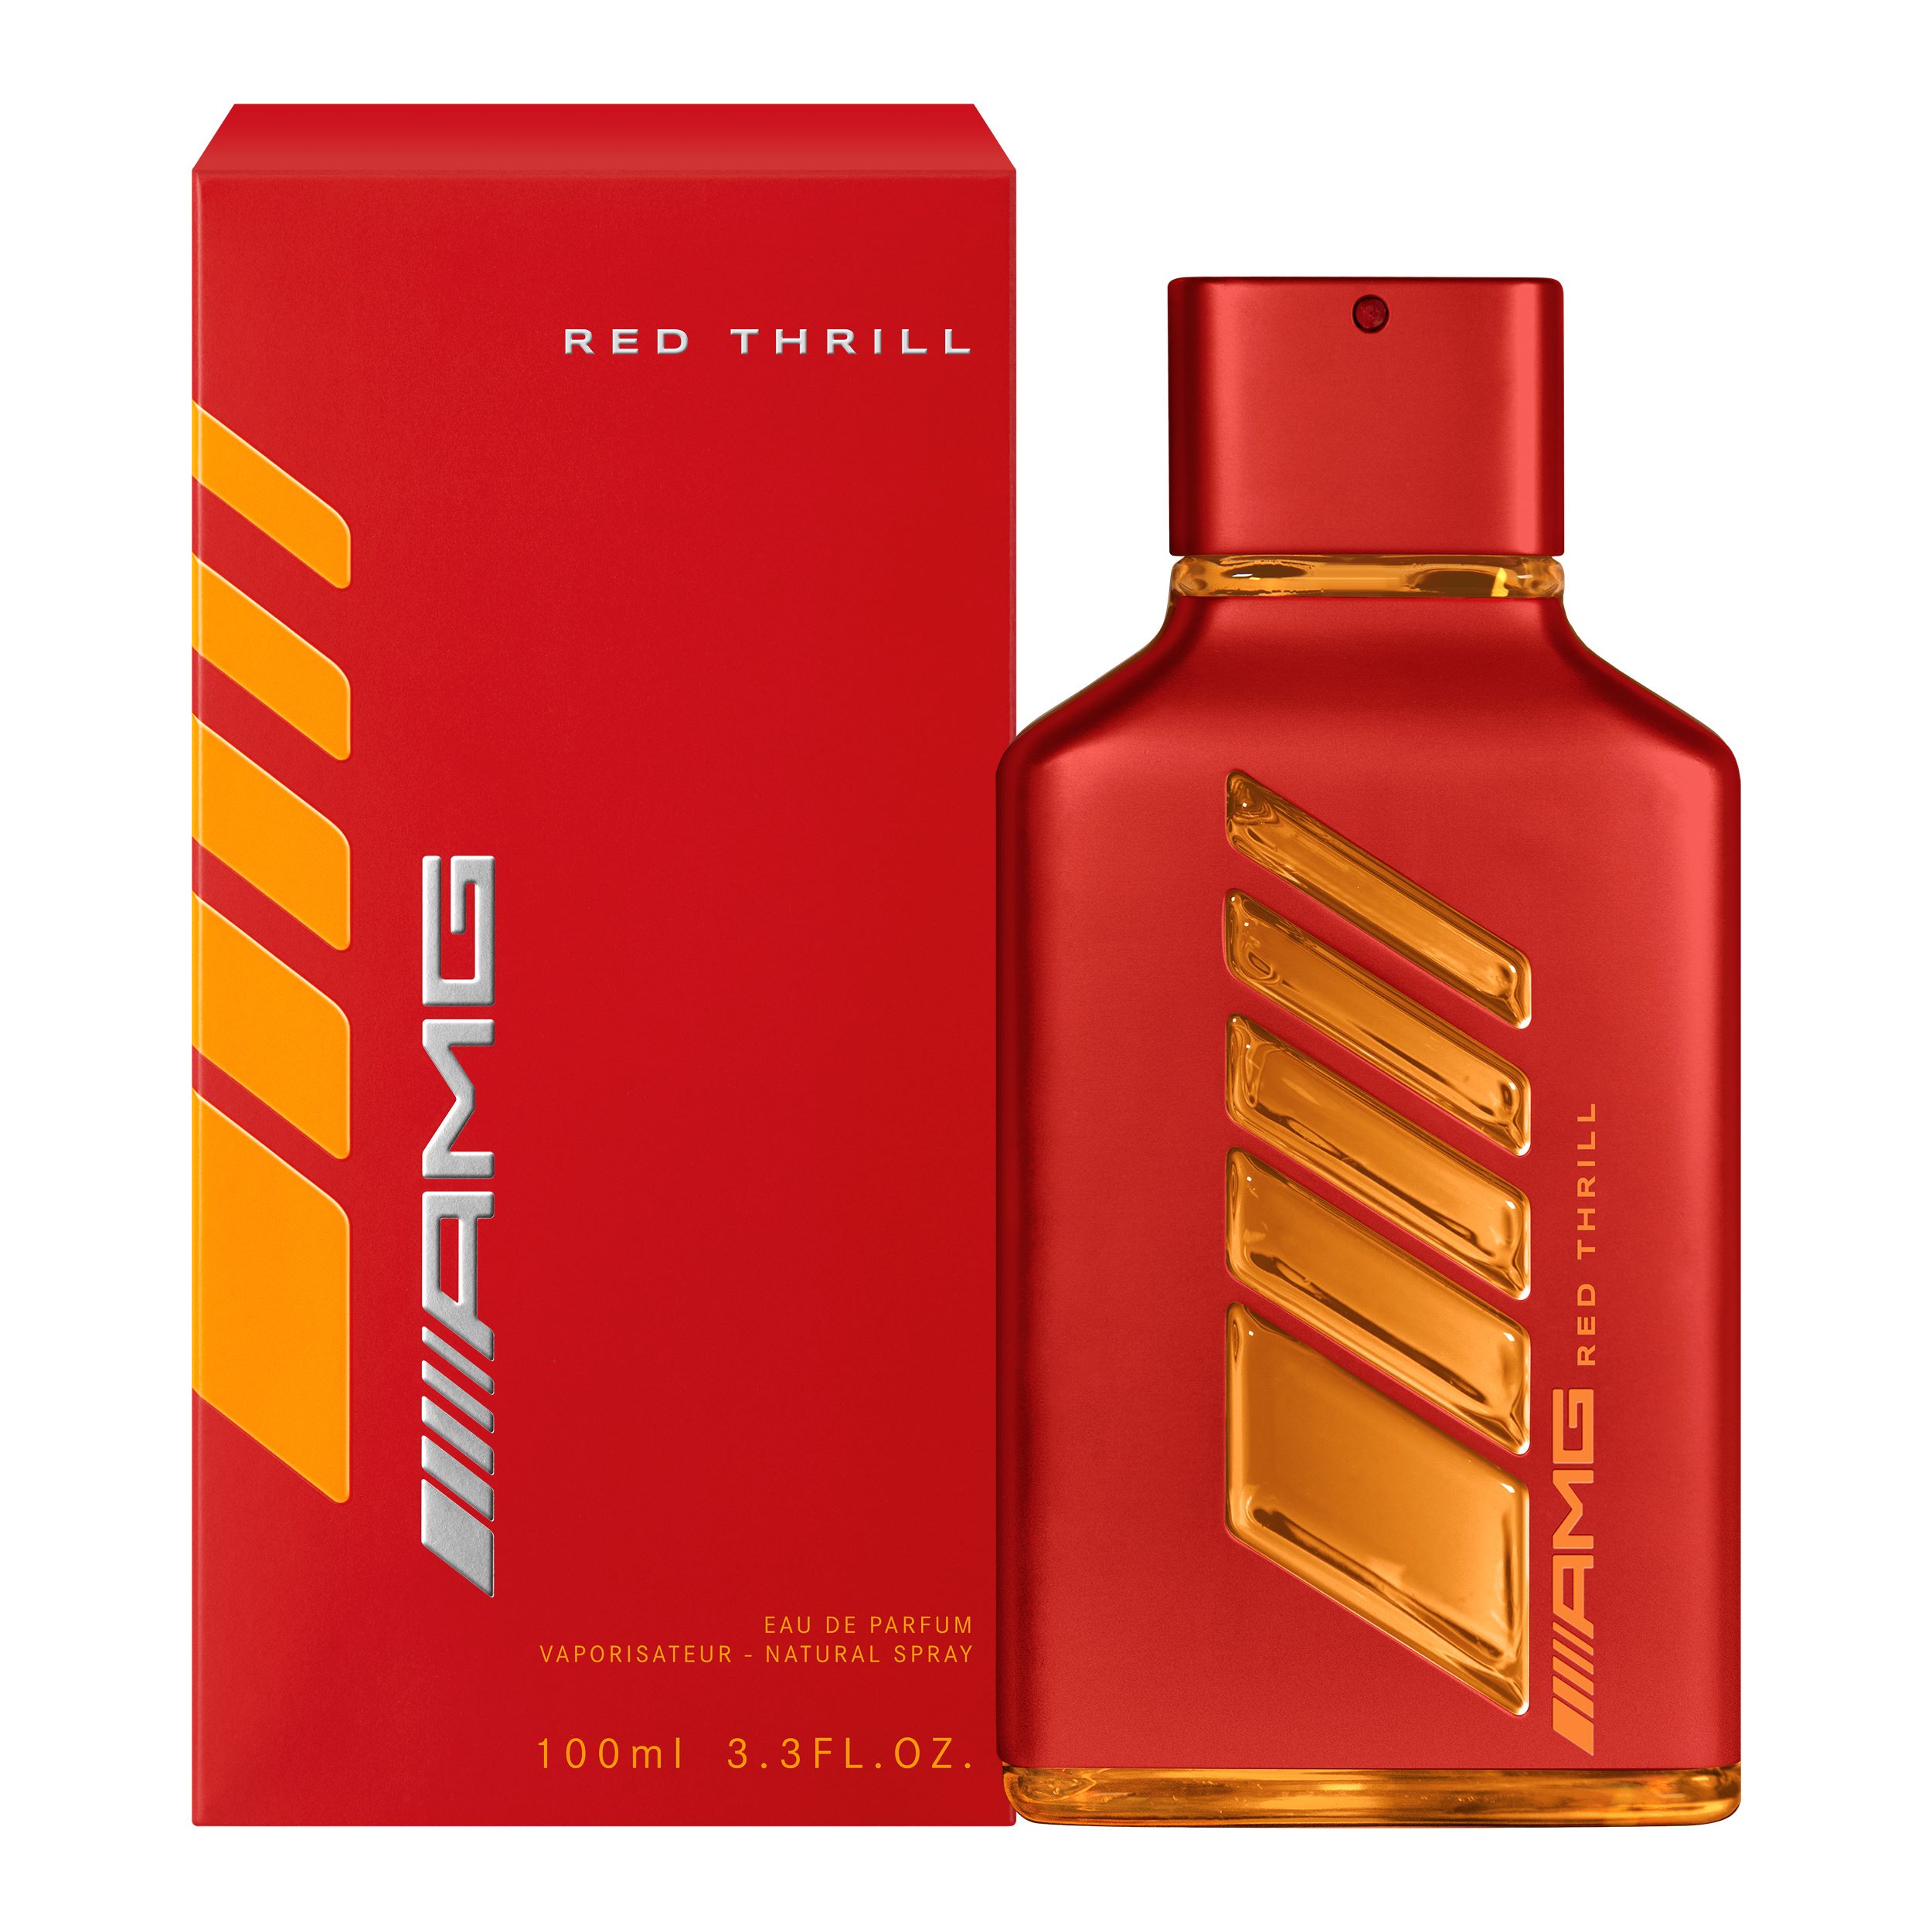 The 'Red Thrill' perfume from the new Mercedes-AMG fragrance range.